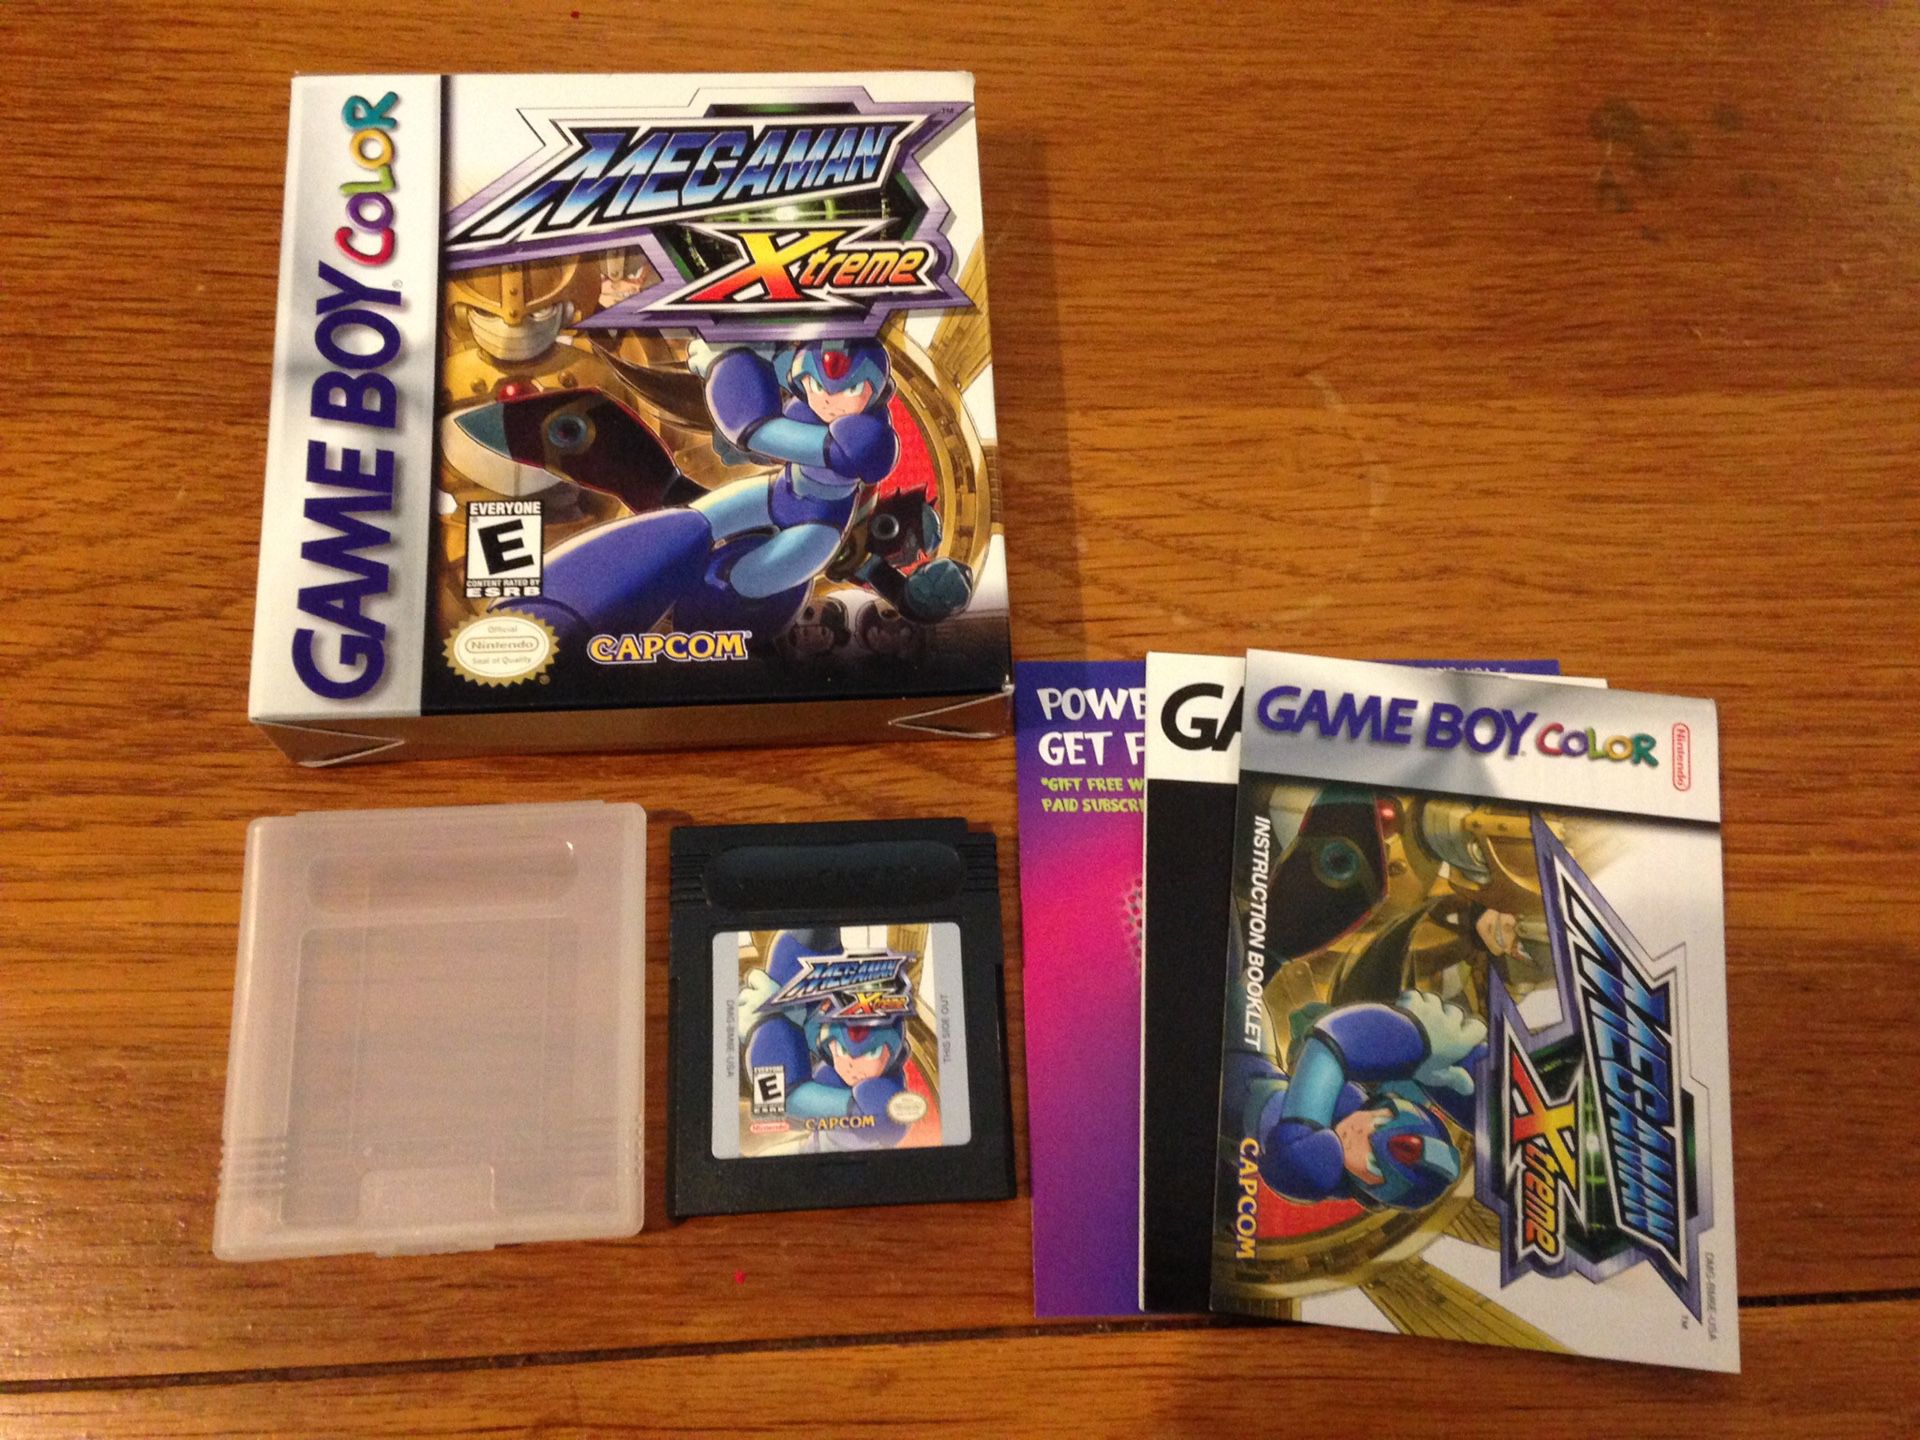 Megaman Xtreme, Gameboy Color, Complete in Box (CiB)